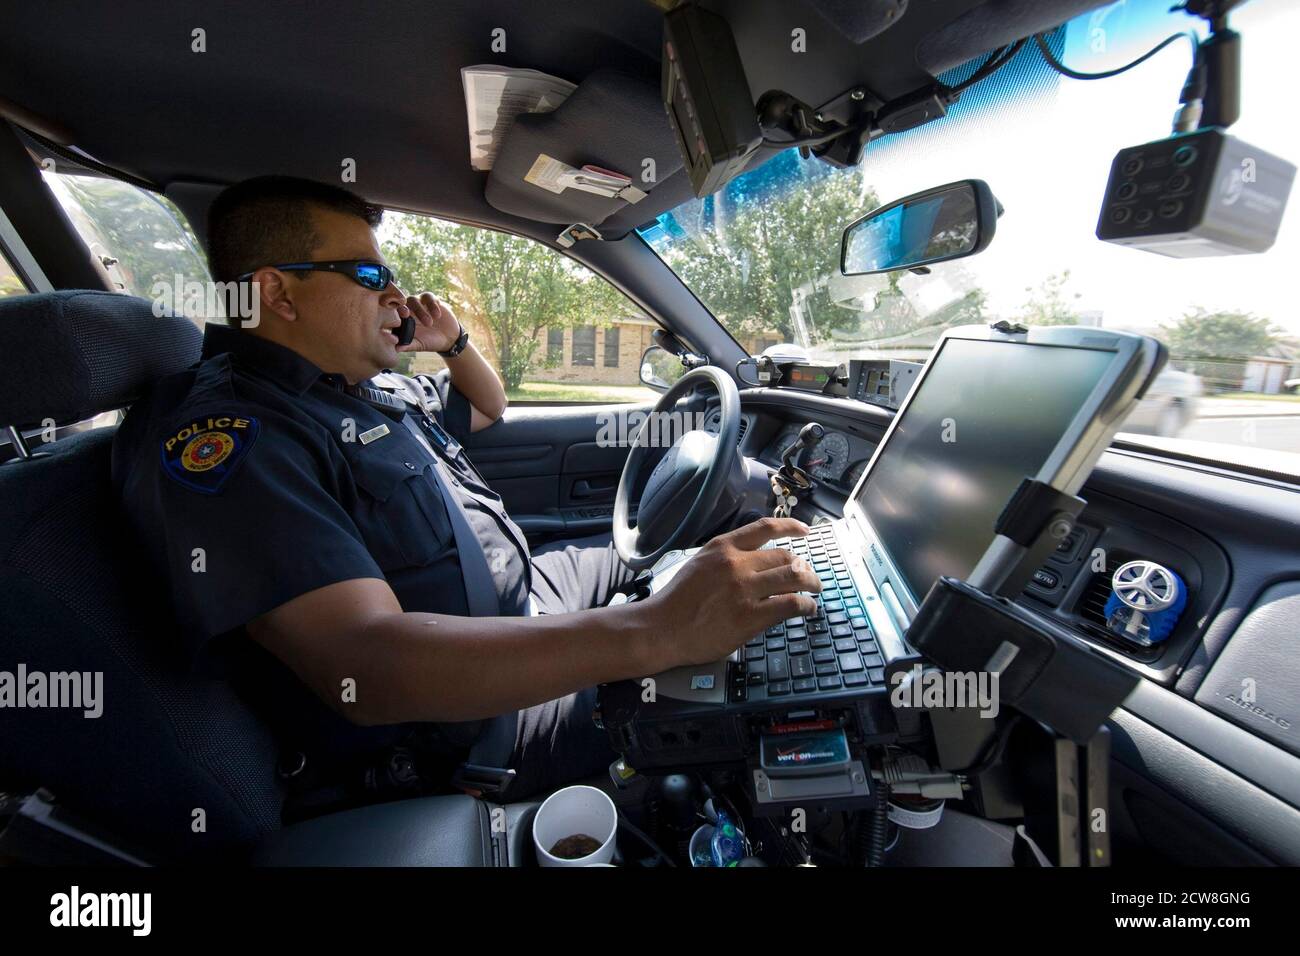 Round Rock, Texas:  July 20, 2008: Routine police work during the summertime work day in a north Austin suburb.  Police officer scans the license plates of cars while on routine patrol. ©Bob Daemmrich Stock Photo